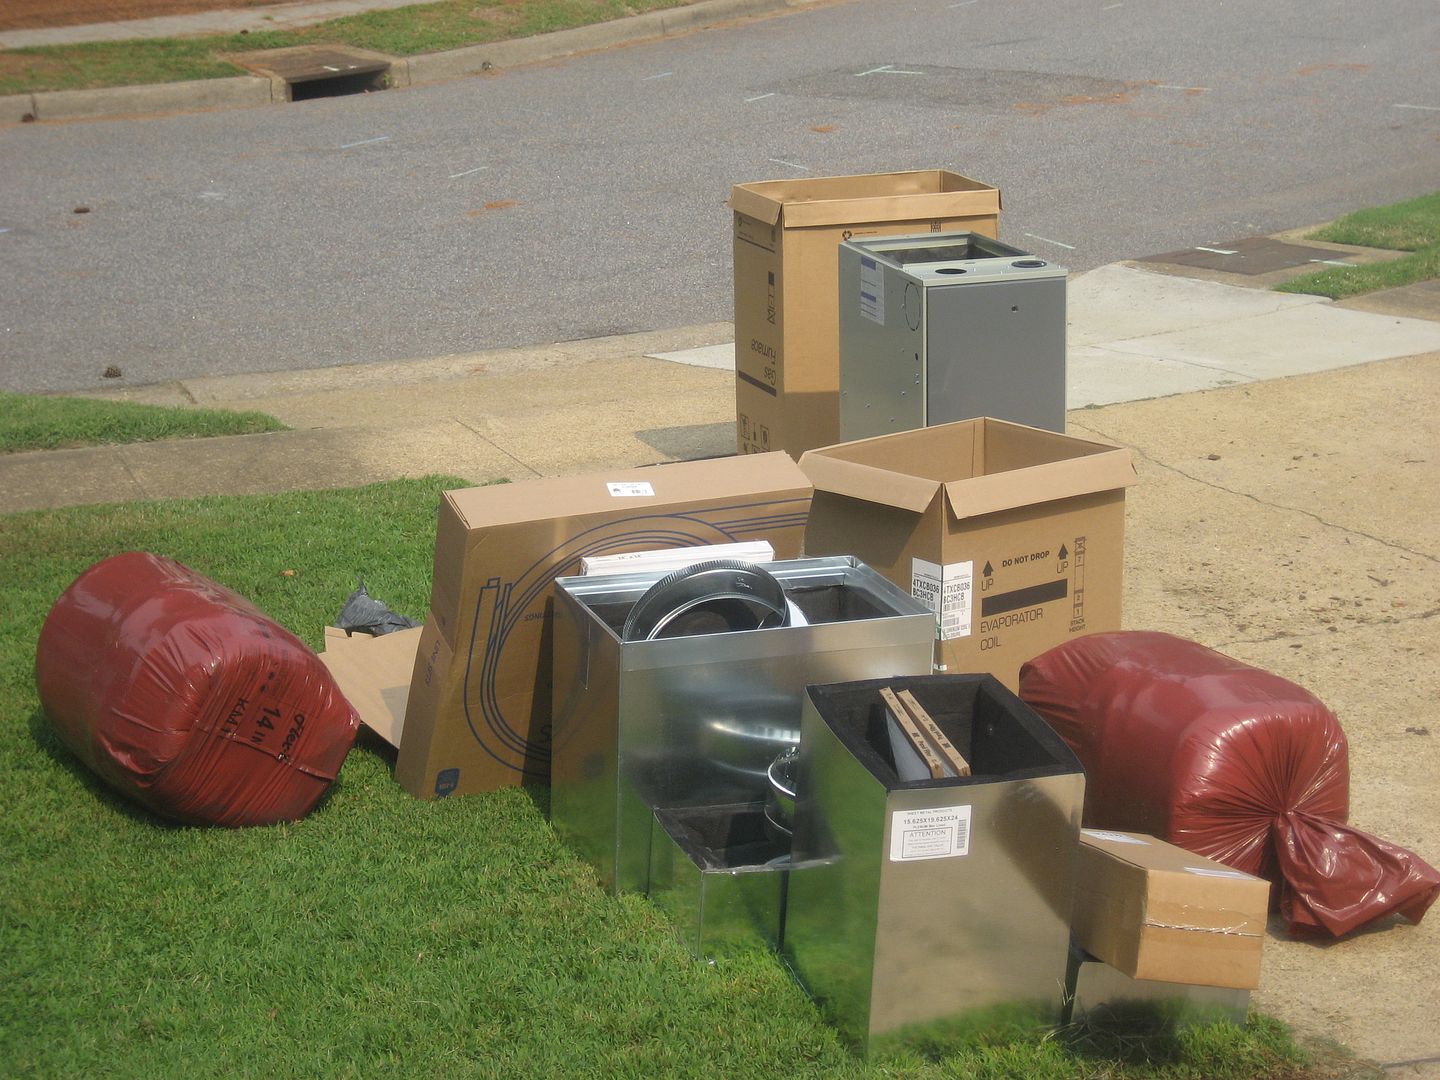 The new stuff waits patiently on the curb.